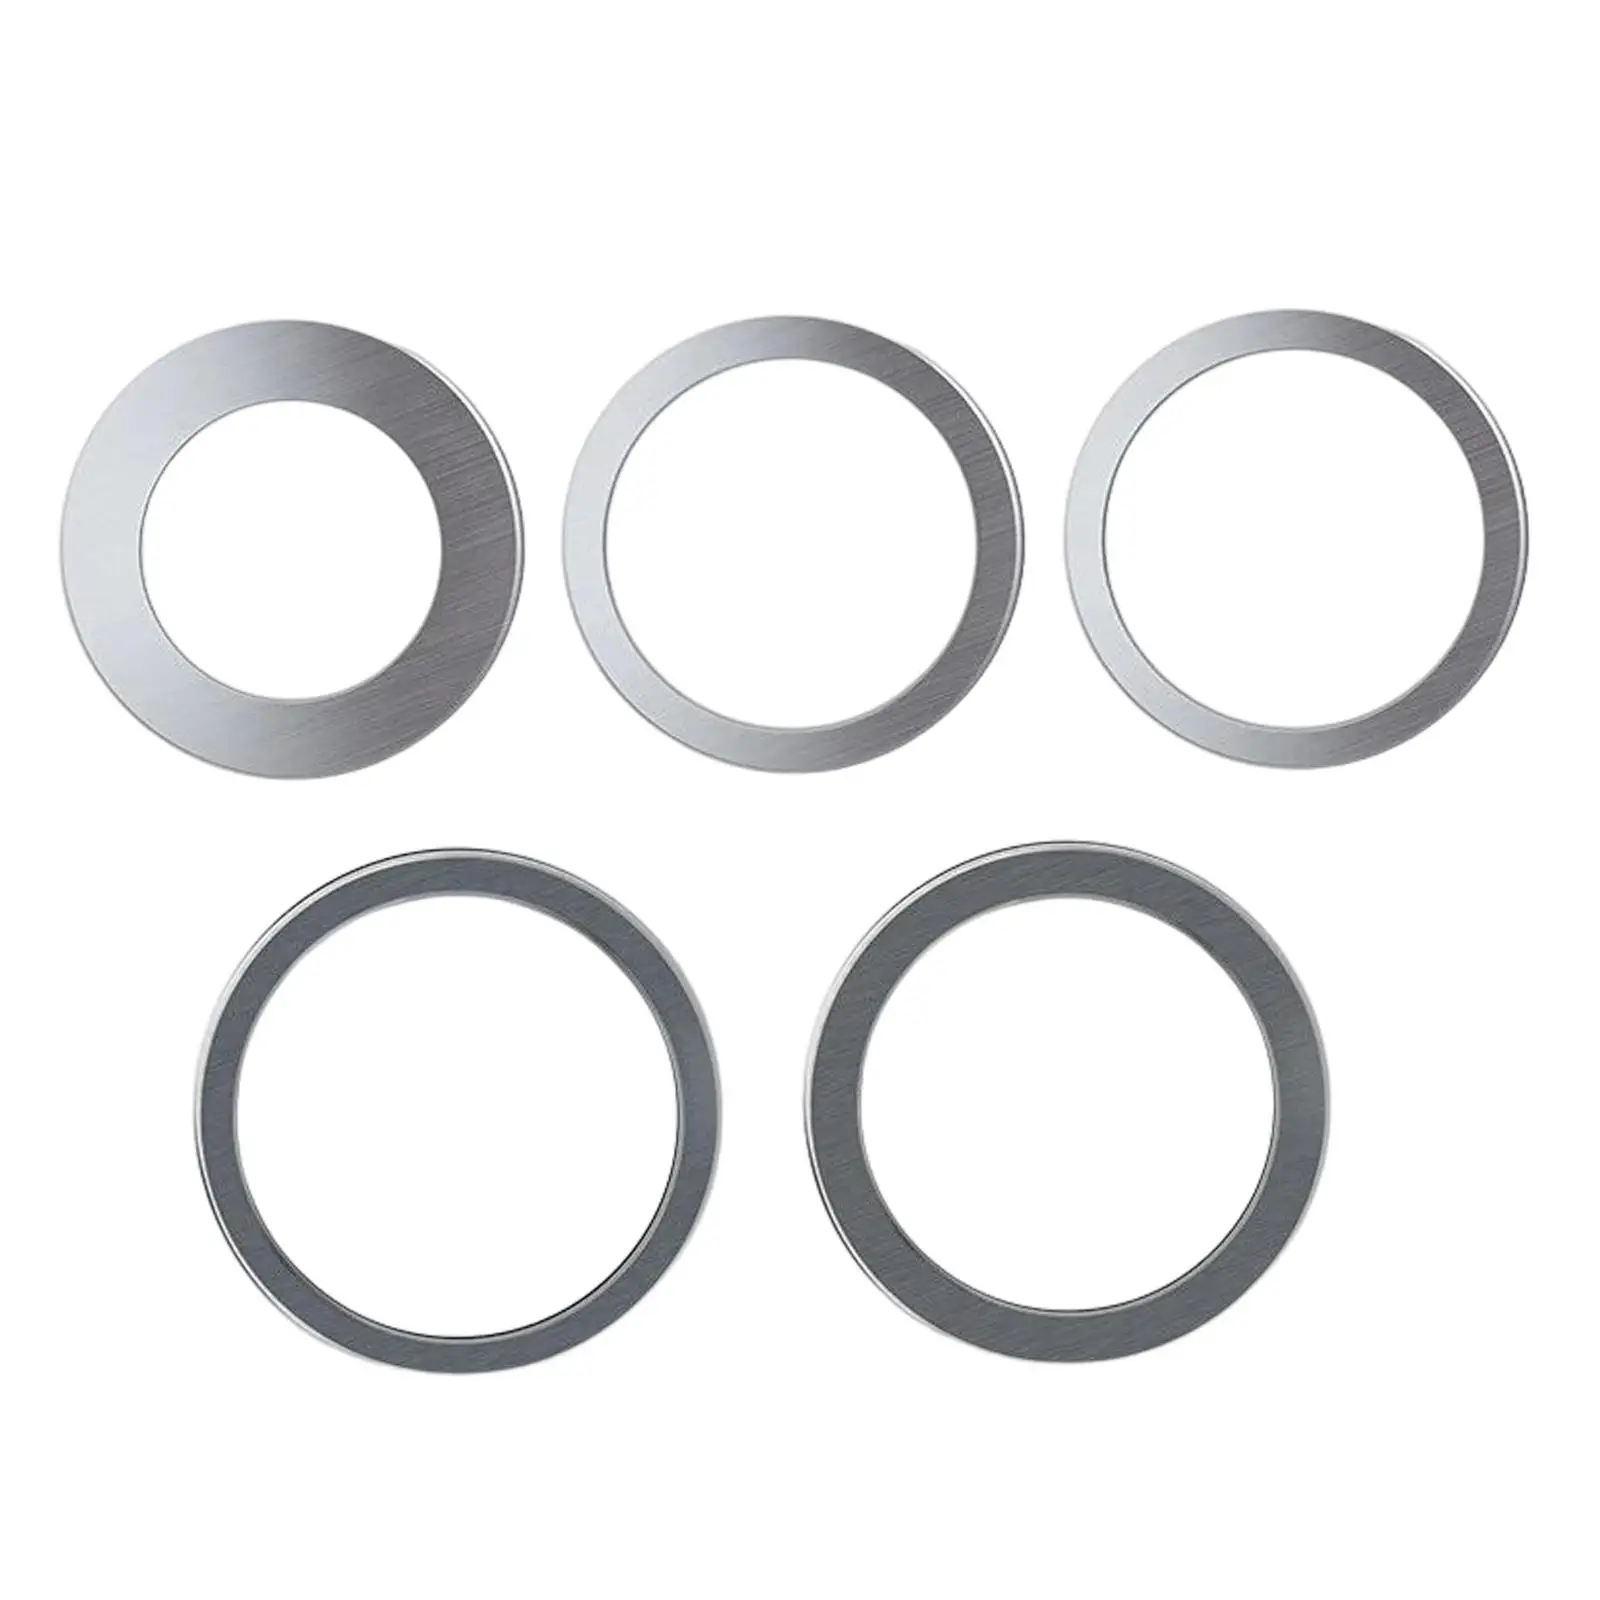 5Pcs Metal Circular Saw Disc Rings for Angle Grinder, Carving Disc Spacer